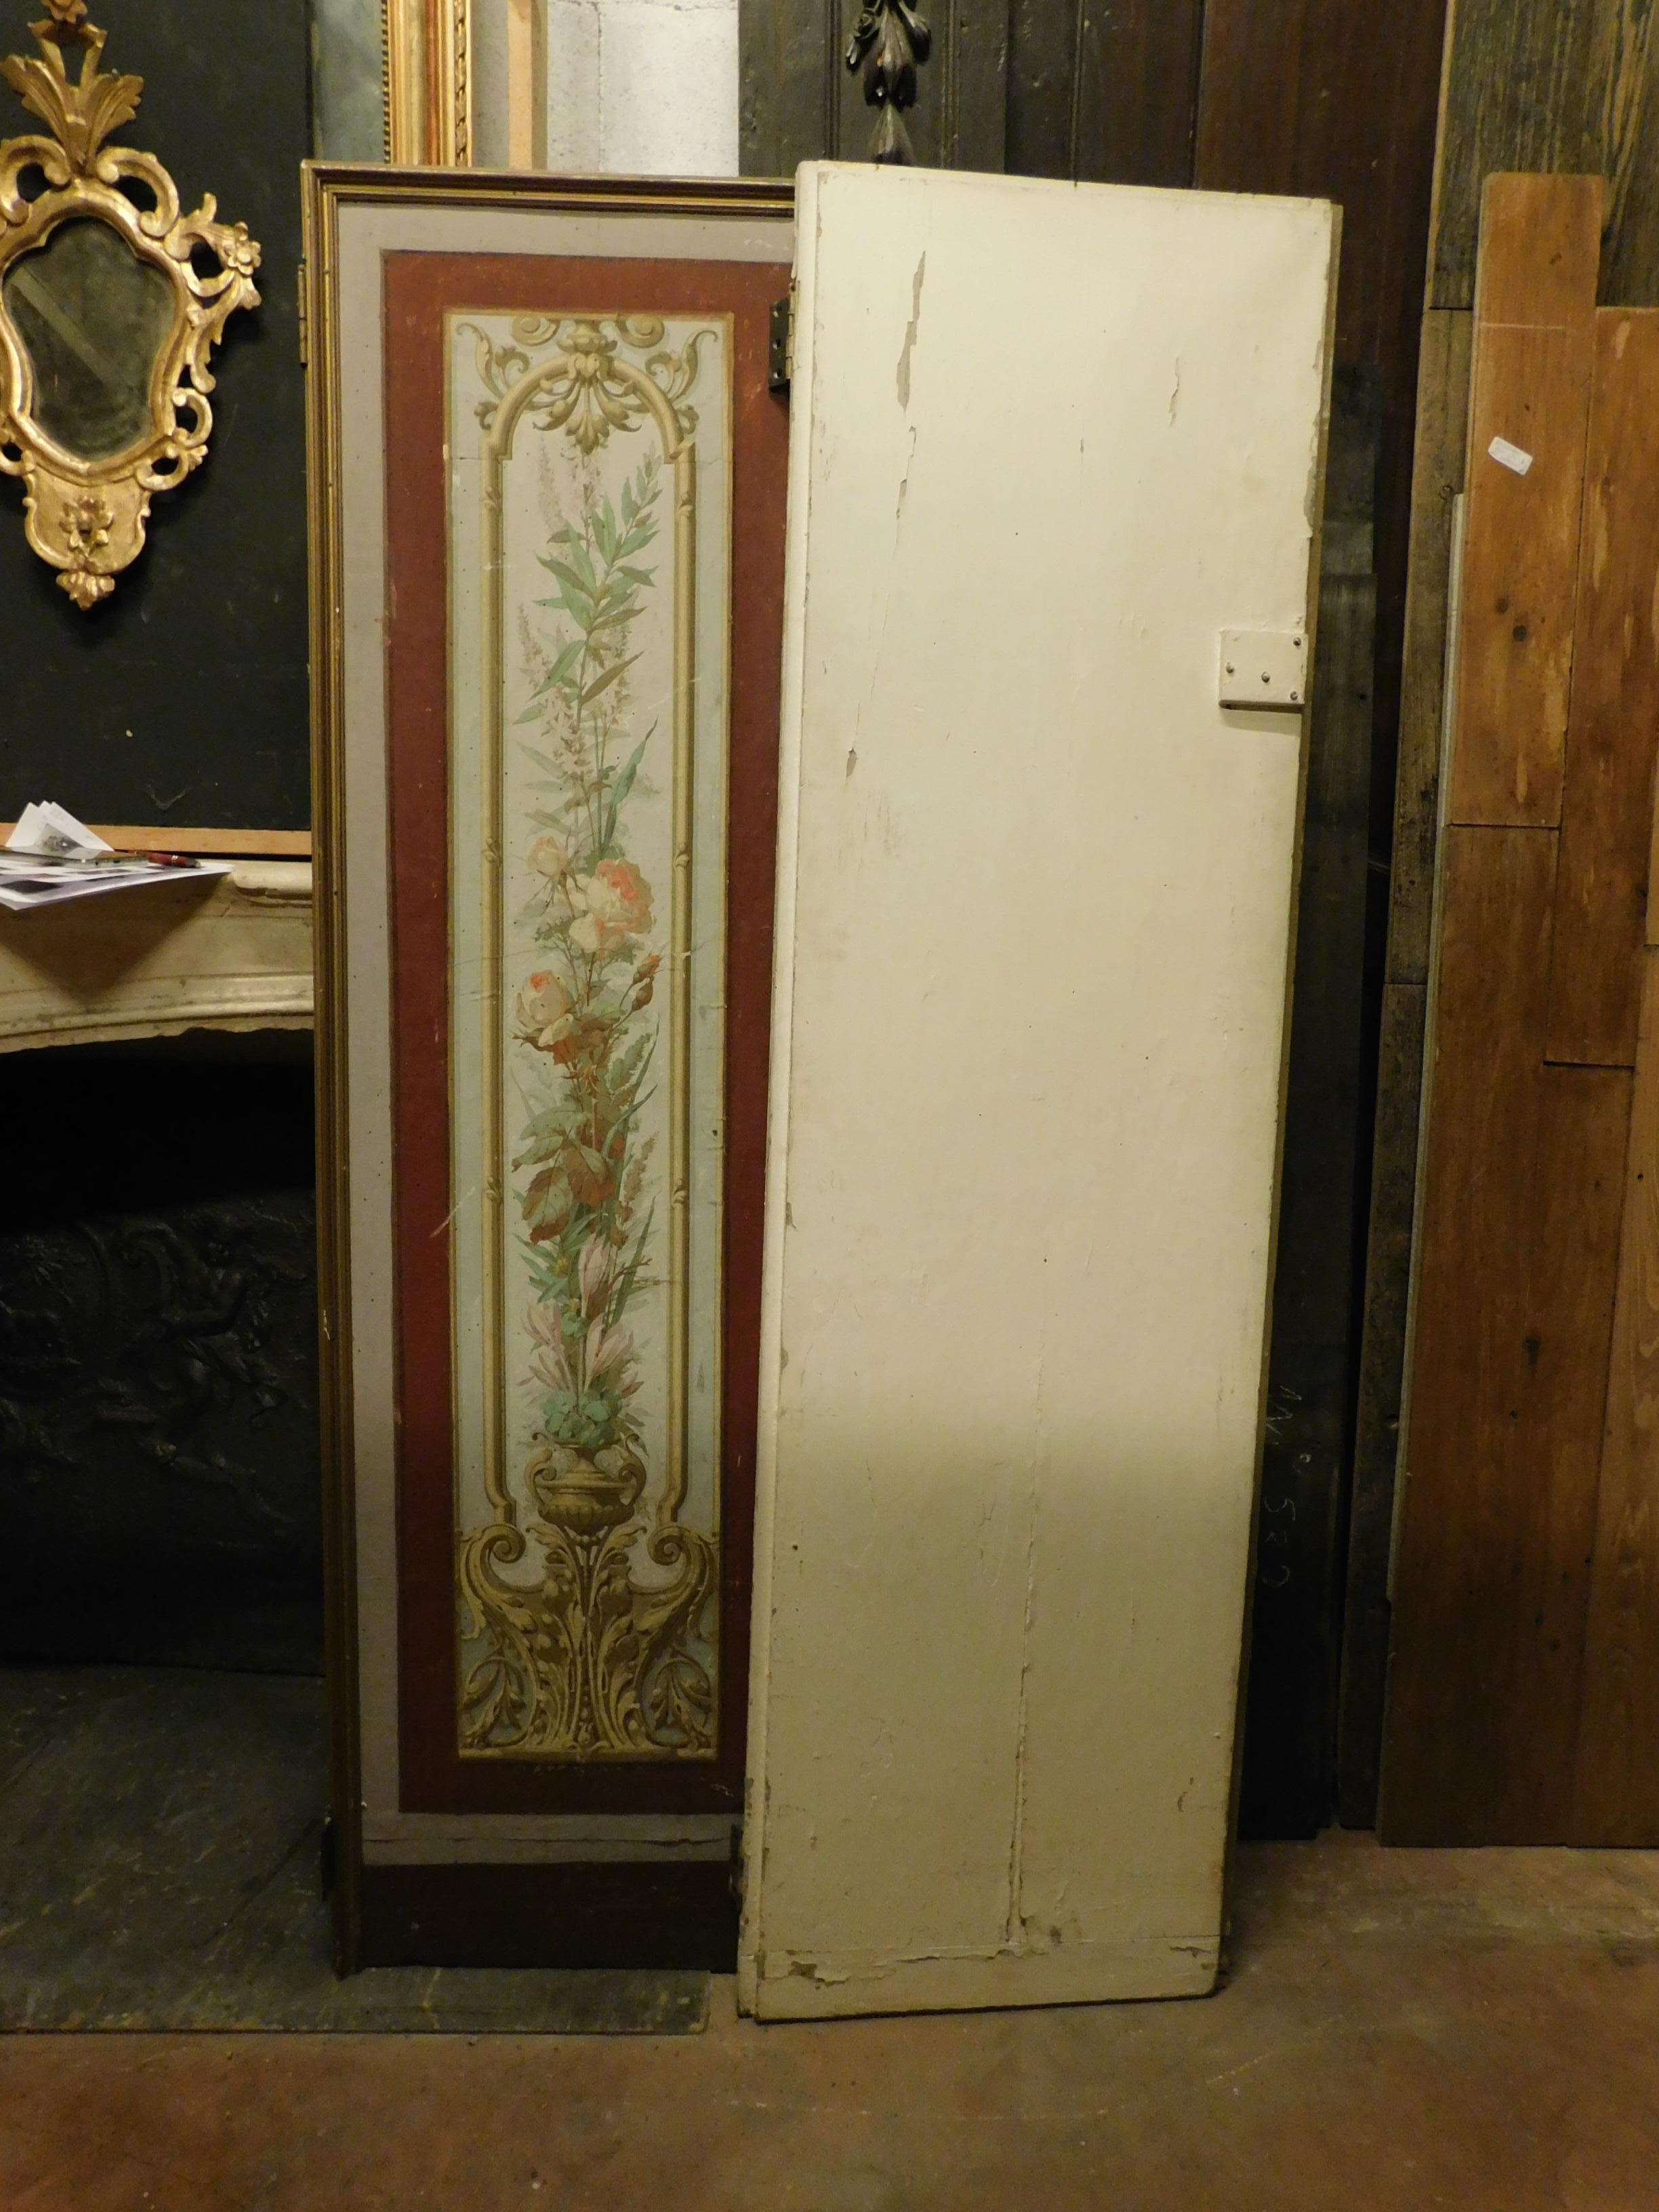 Wood Vintage Pair of Lacquered and Painted Doors, Art Nouveau, Liberty, Early 1900s For Sale